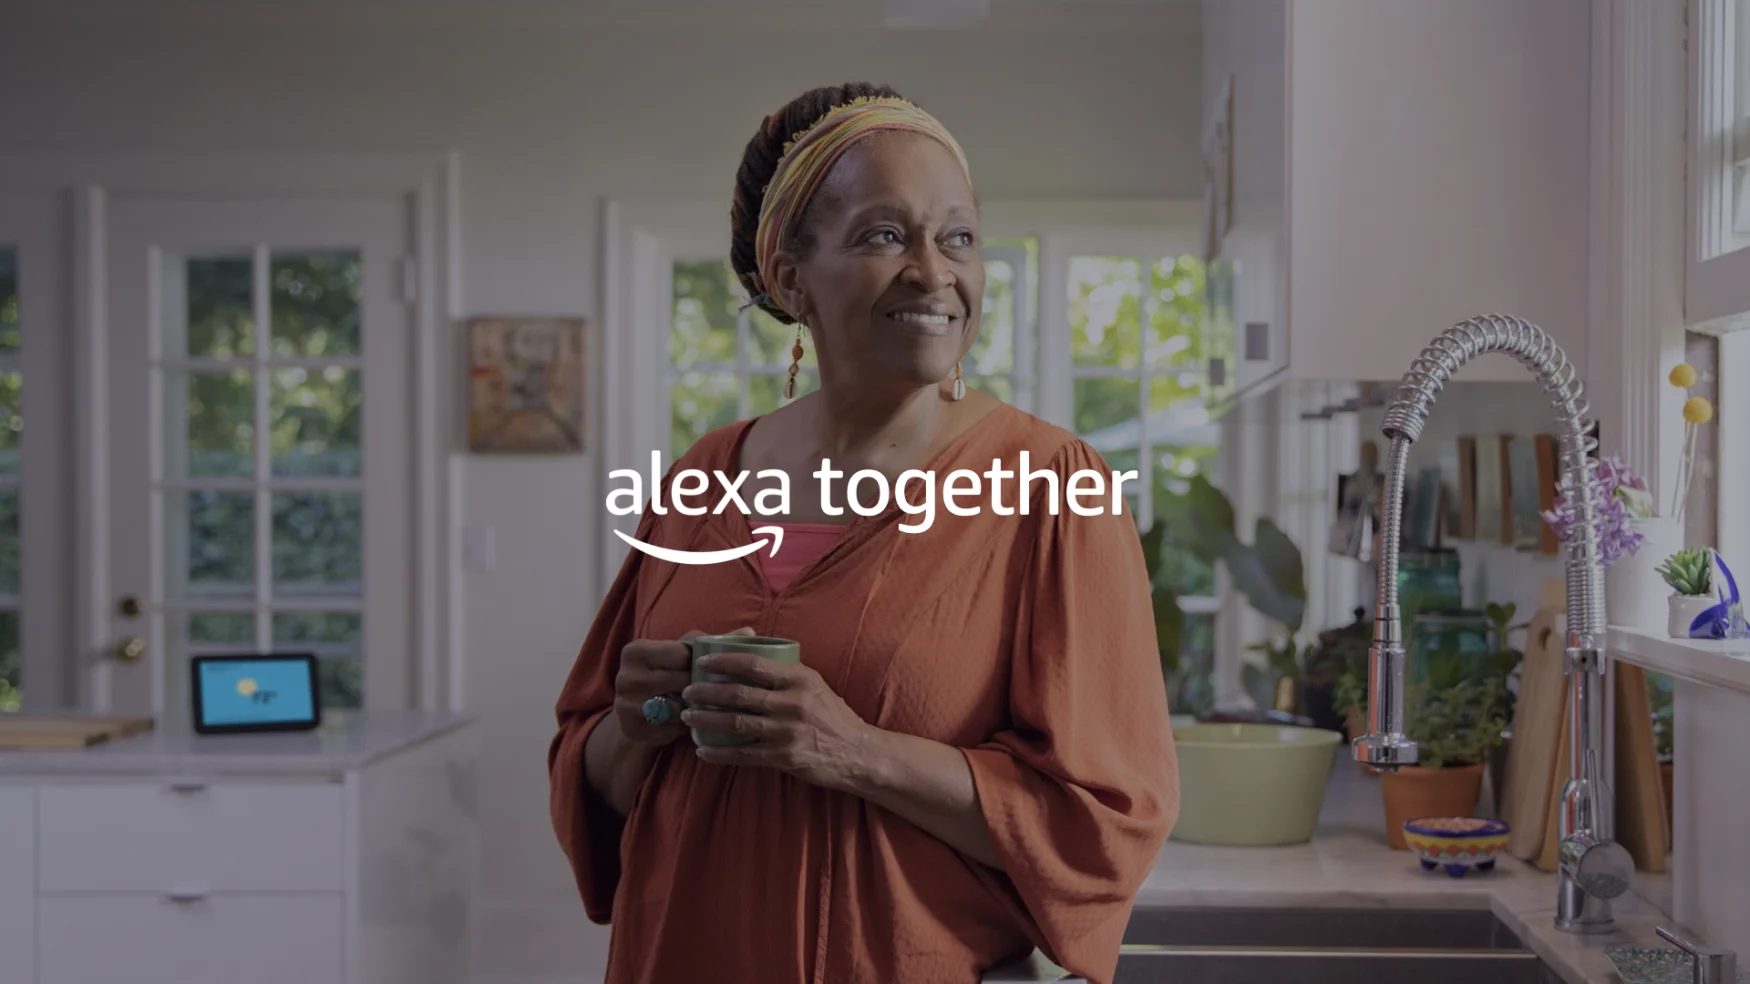 A woman holding a mug, with an Alexa display on a kitchen table in the background. The words 